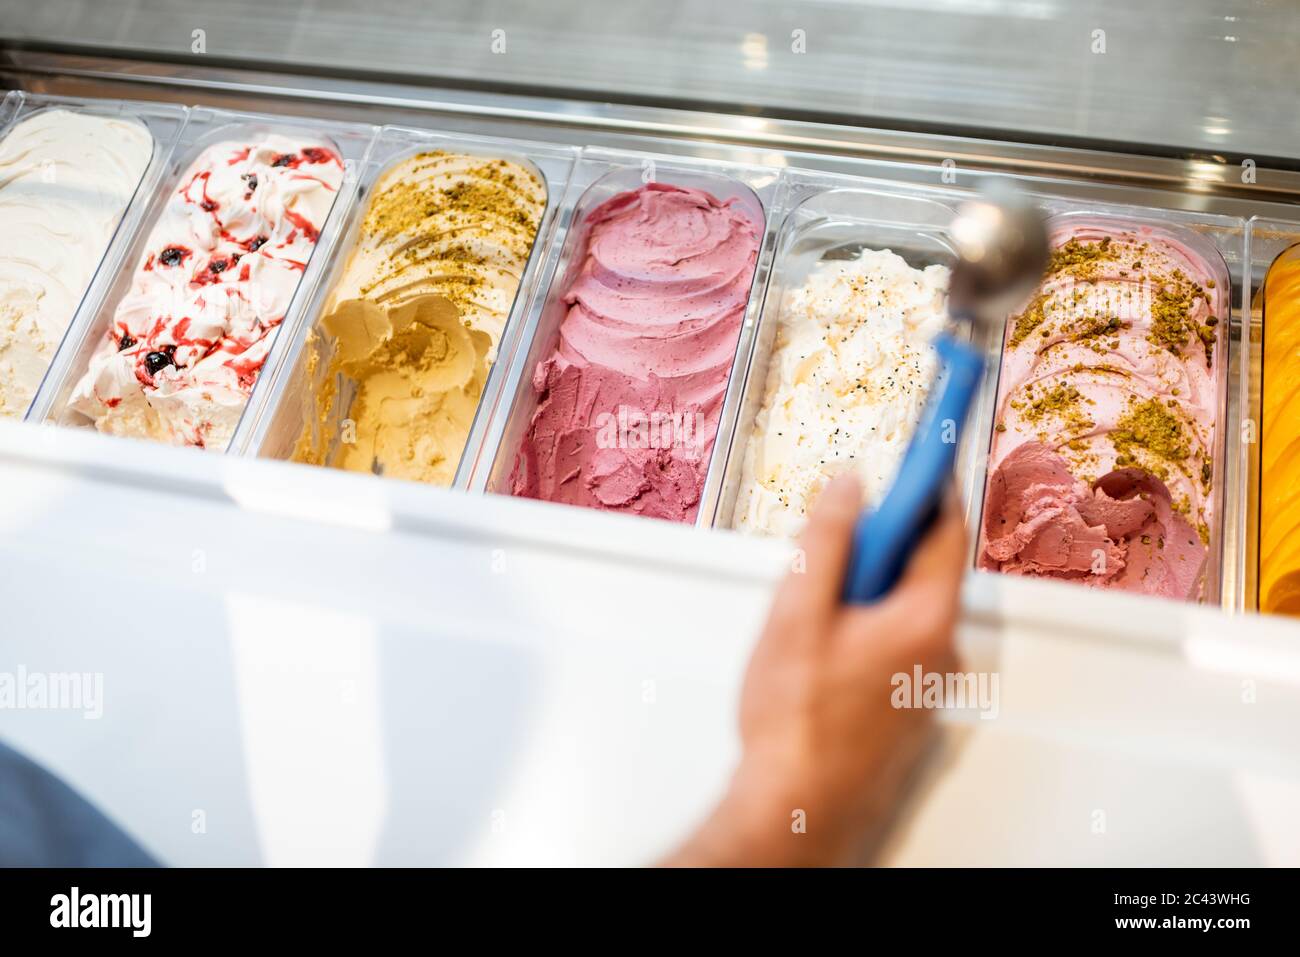 Salesman picking ice cream with a spoon from refrigerator in the store. View from above on a trays full of ice cream with different flavors Stock Photo